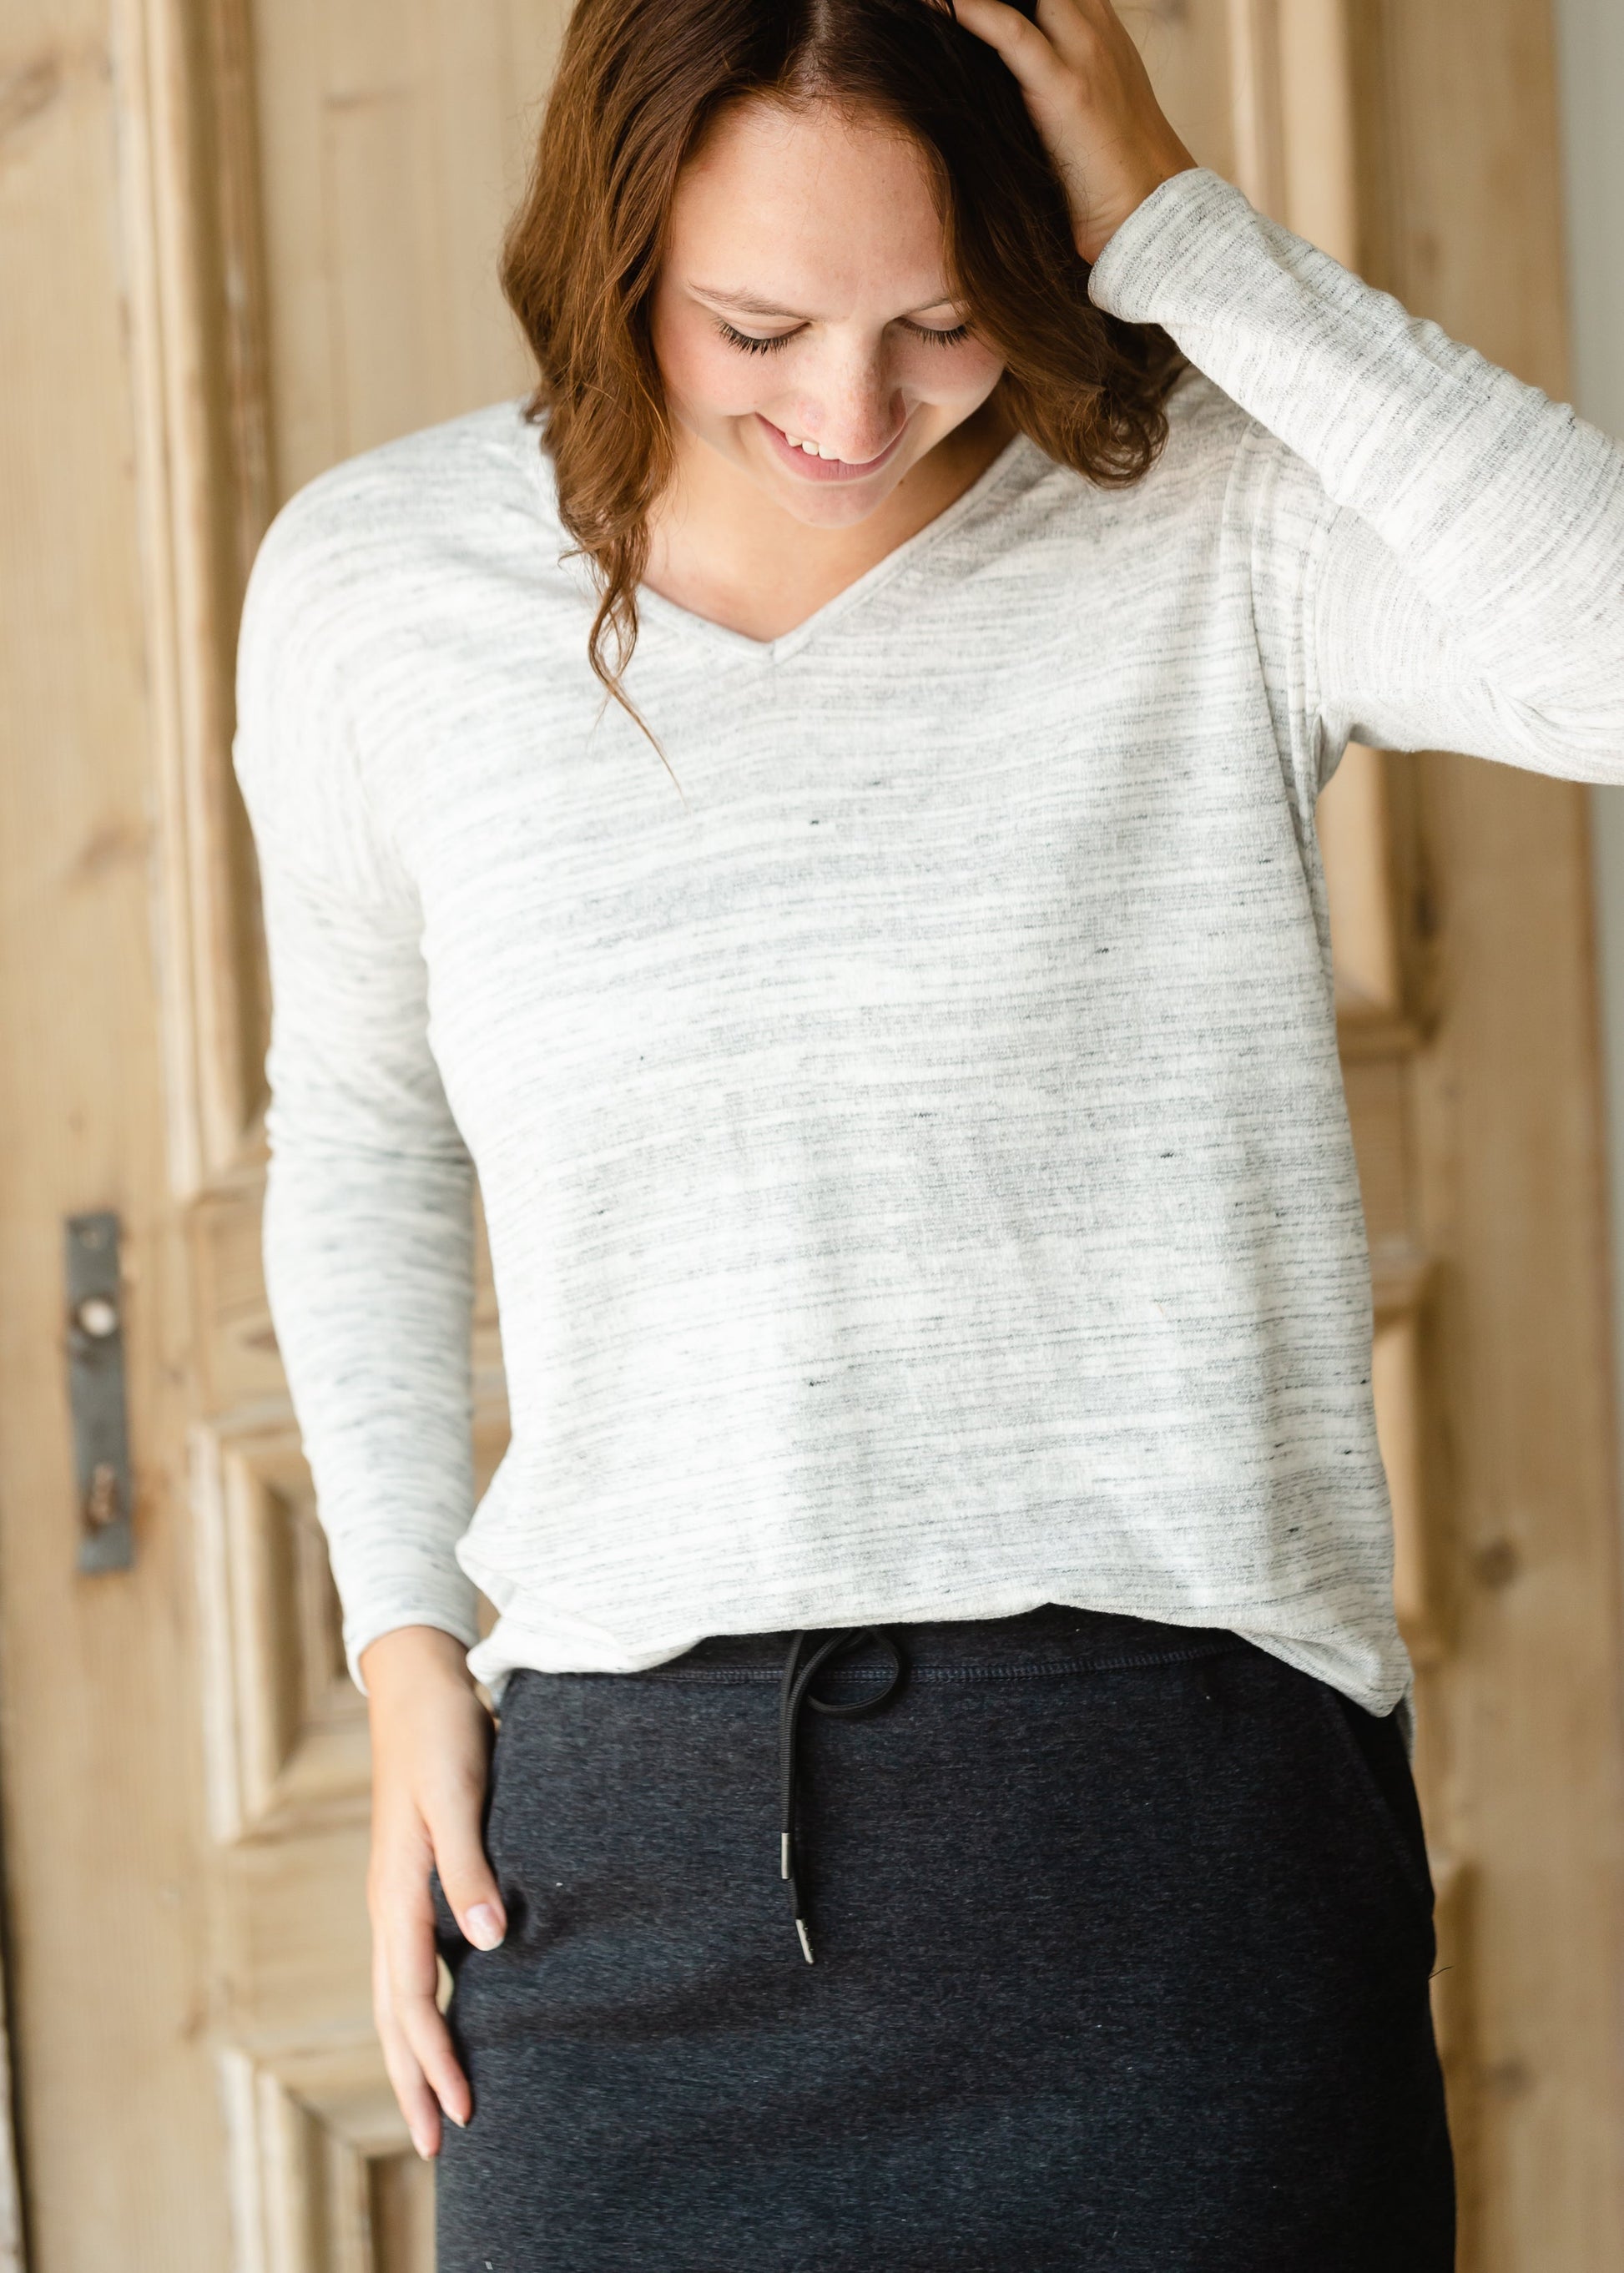 Heather Gray V Neck Top - FINAL SALE Tops